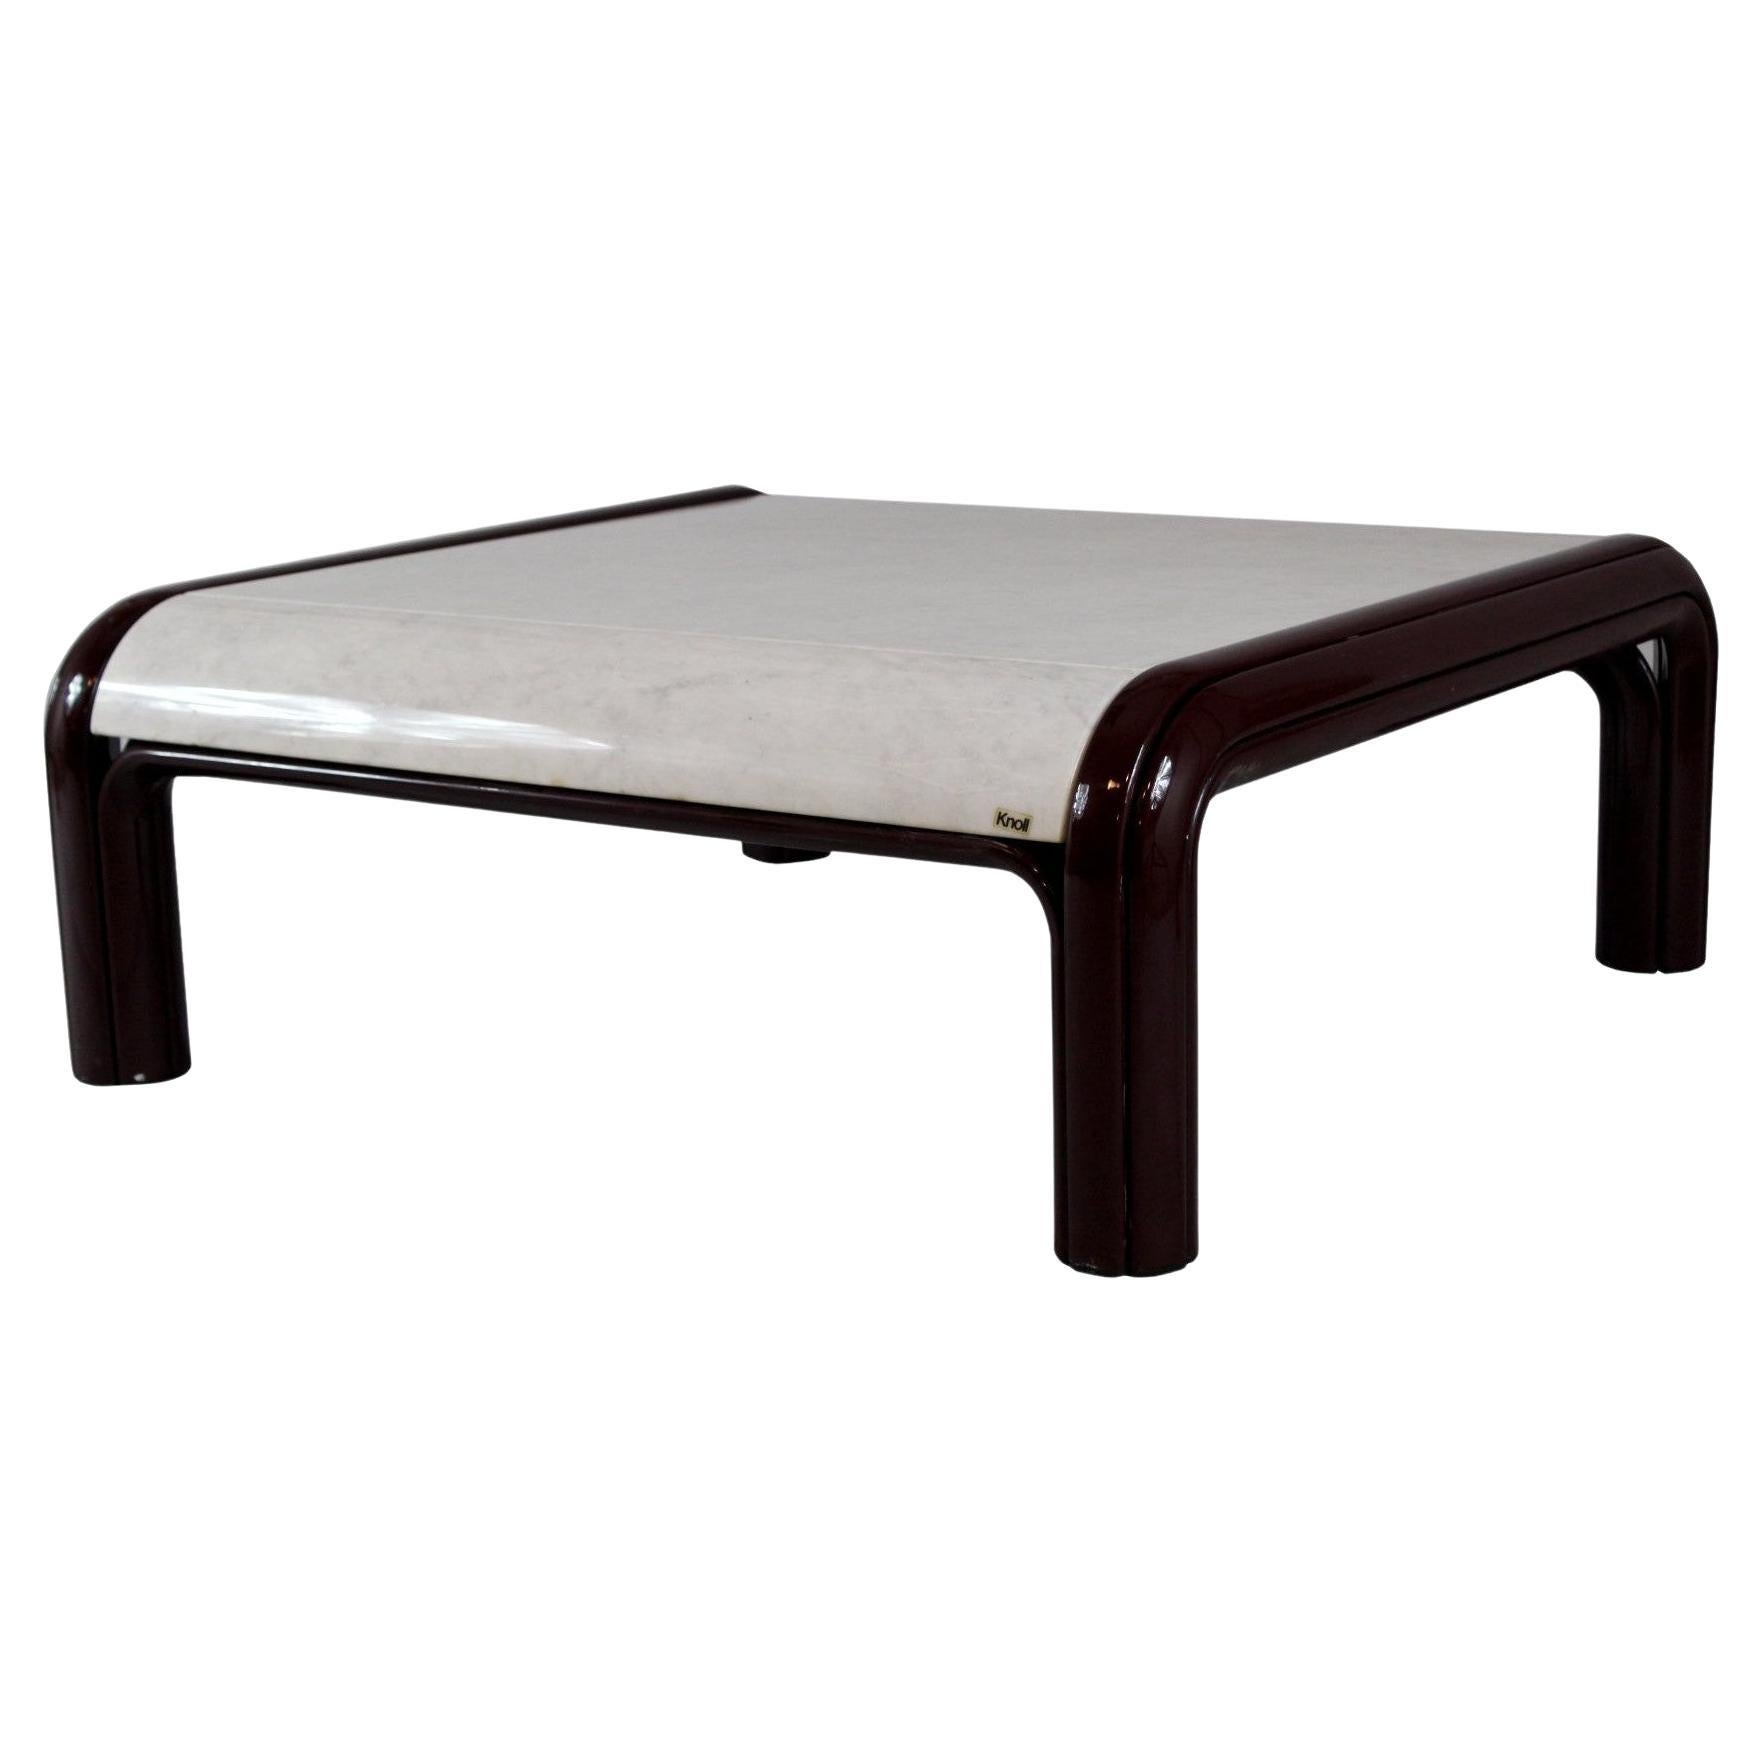 Aluminium and Marble Coffee Table by Gae Aulenti for Knoll, 1970s For Sale